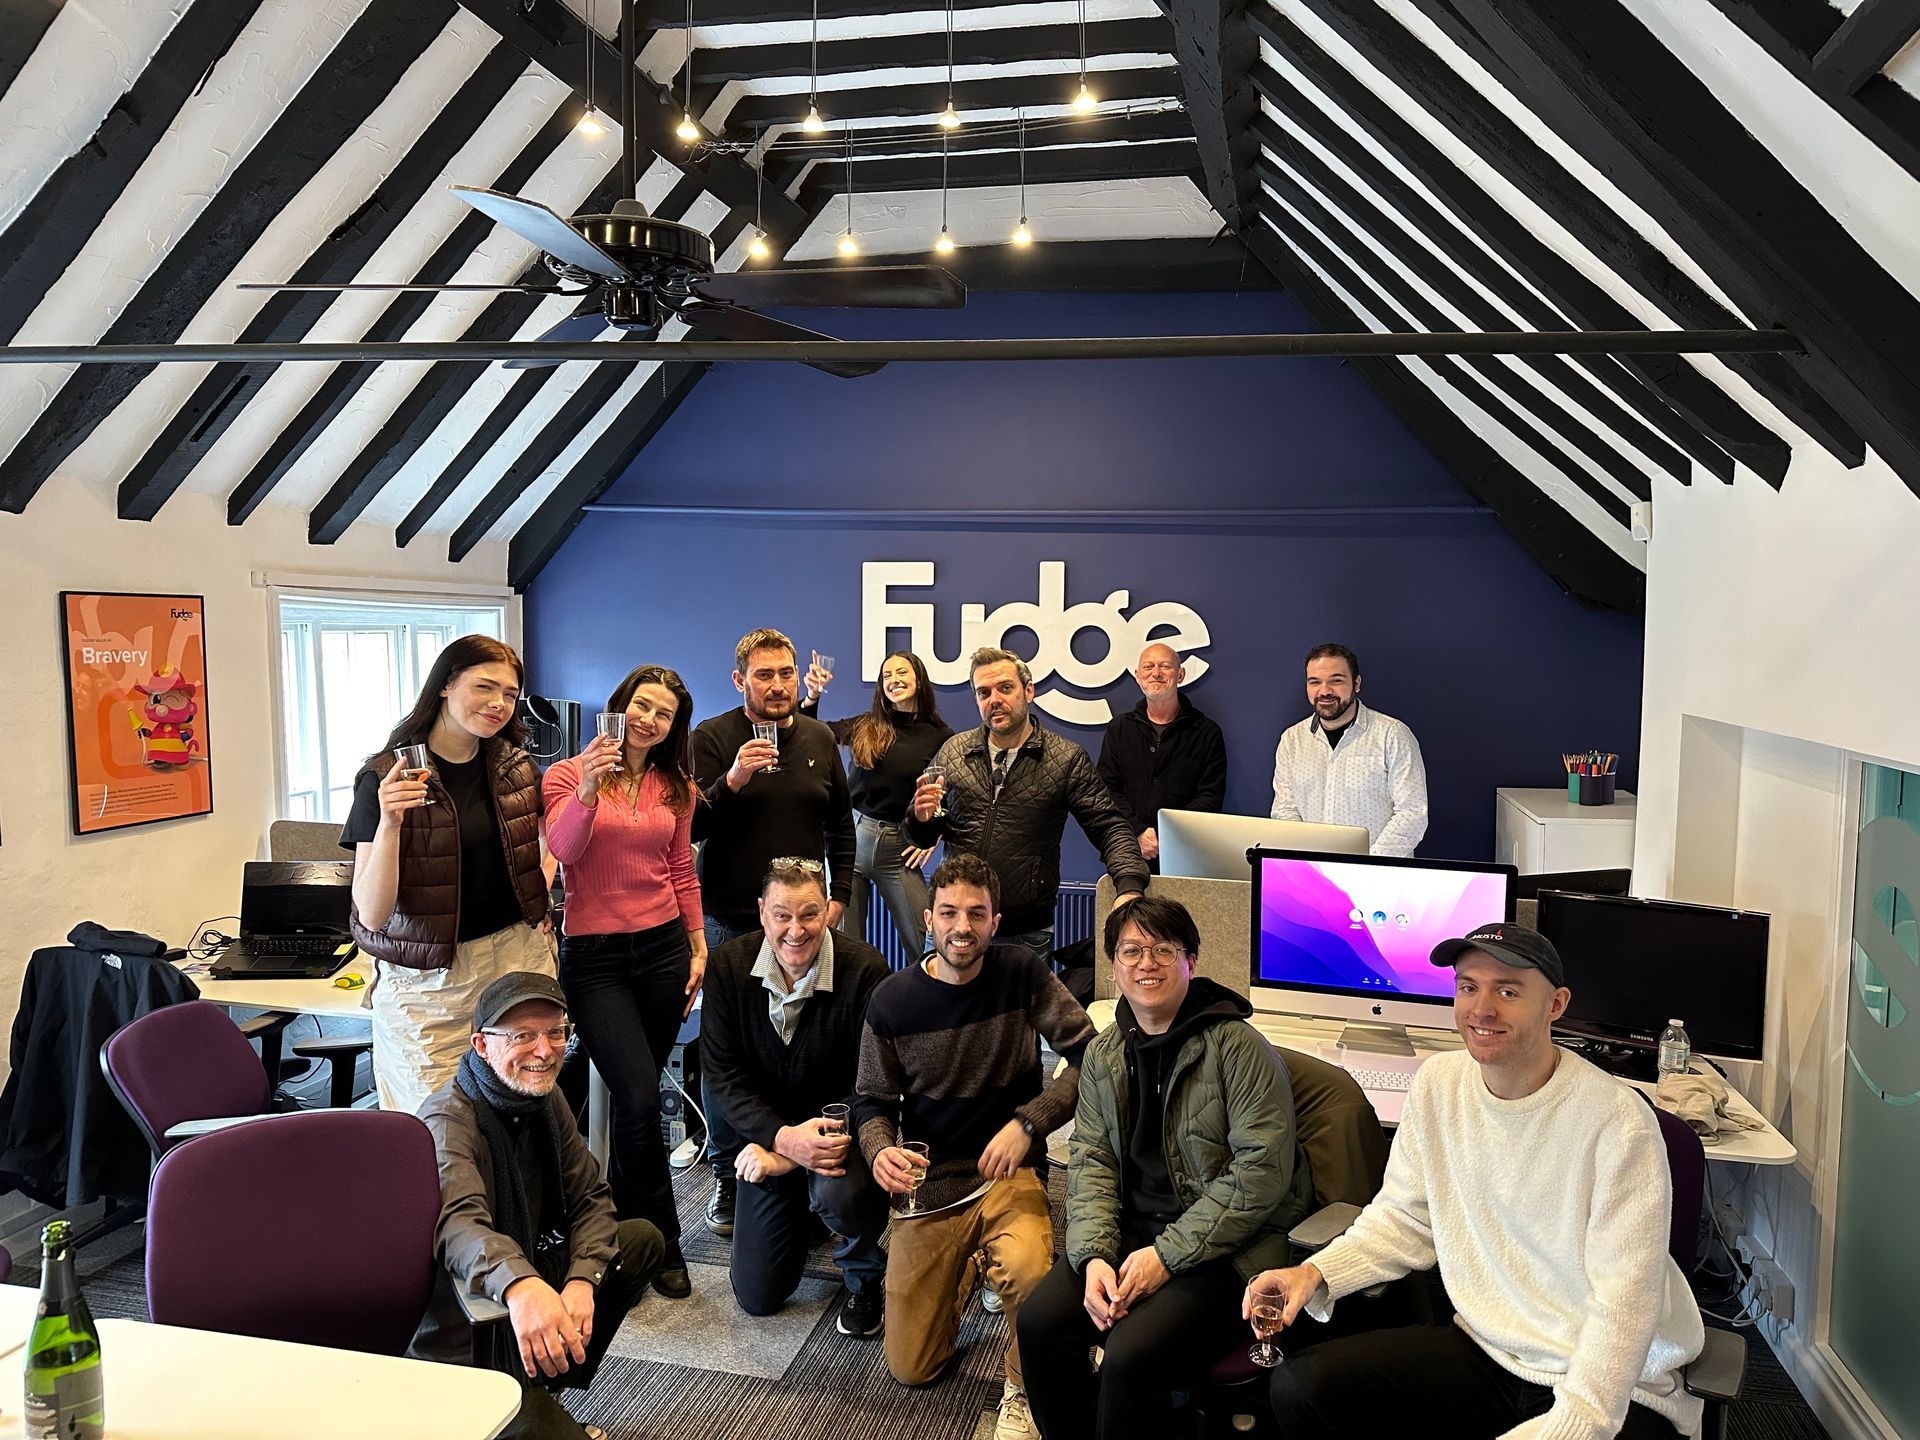 Creative company chooses Farnham as its base for the next stage in growth